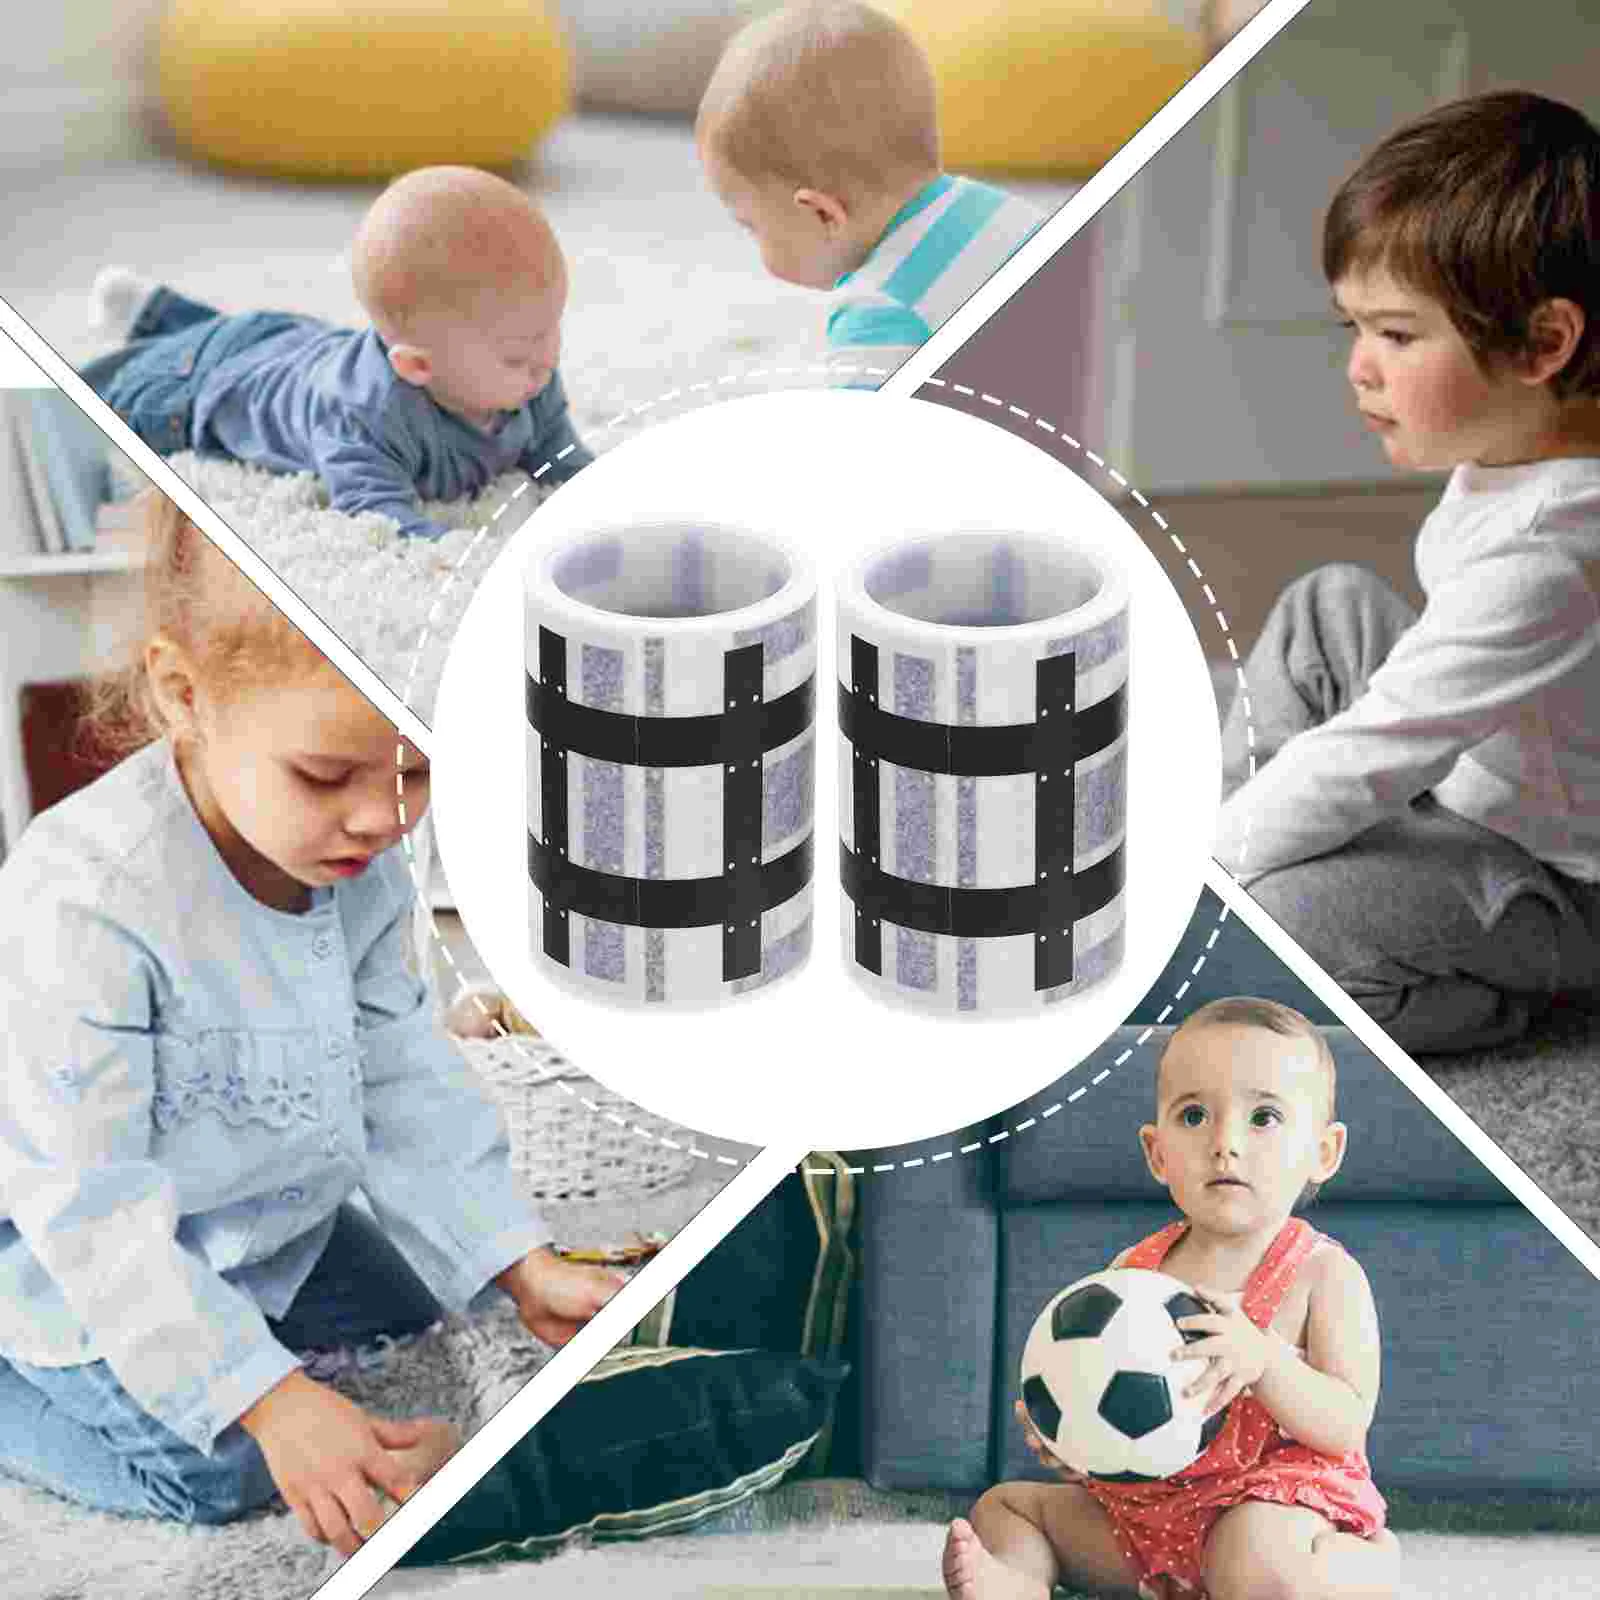 

Track Tape Kids Toy Road Decal Child Traffic Adhesive Tapes DIY Railway Stickers Highway